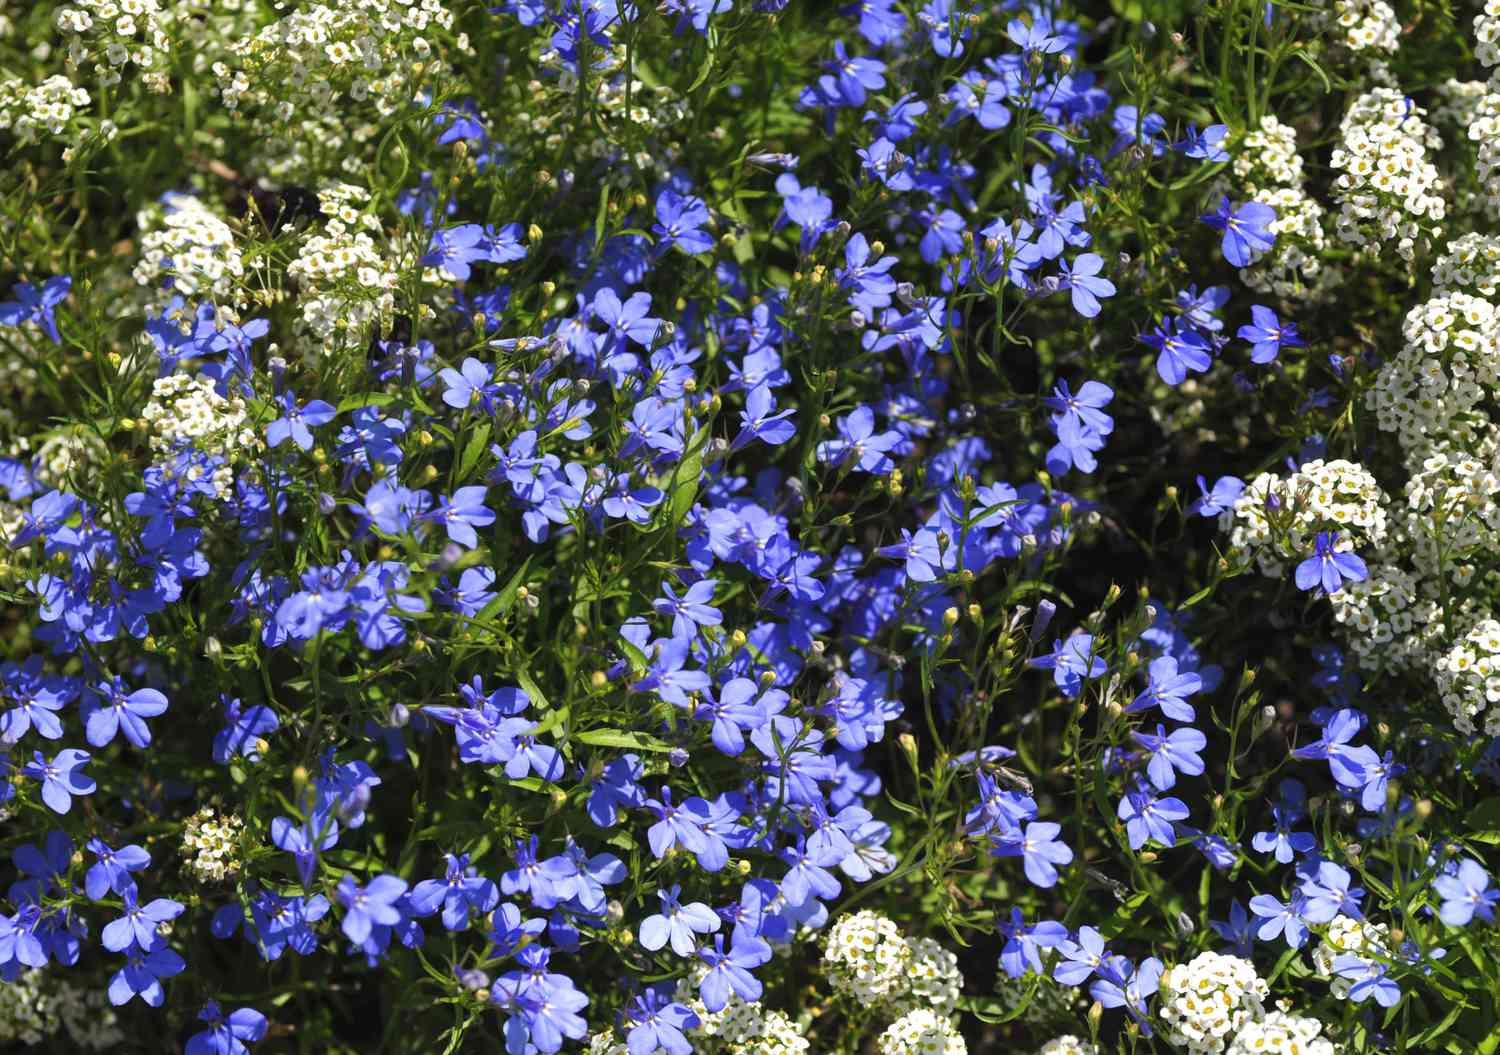 Lobelia plant with small blue-purple flowers in between leaves and small white flower clusters